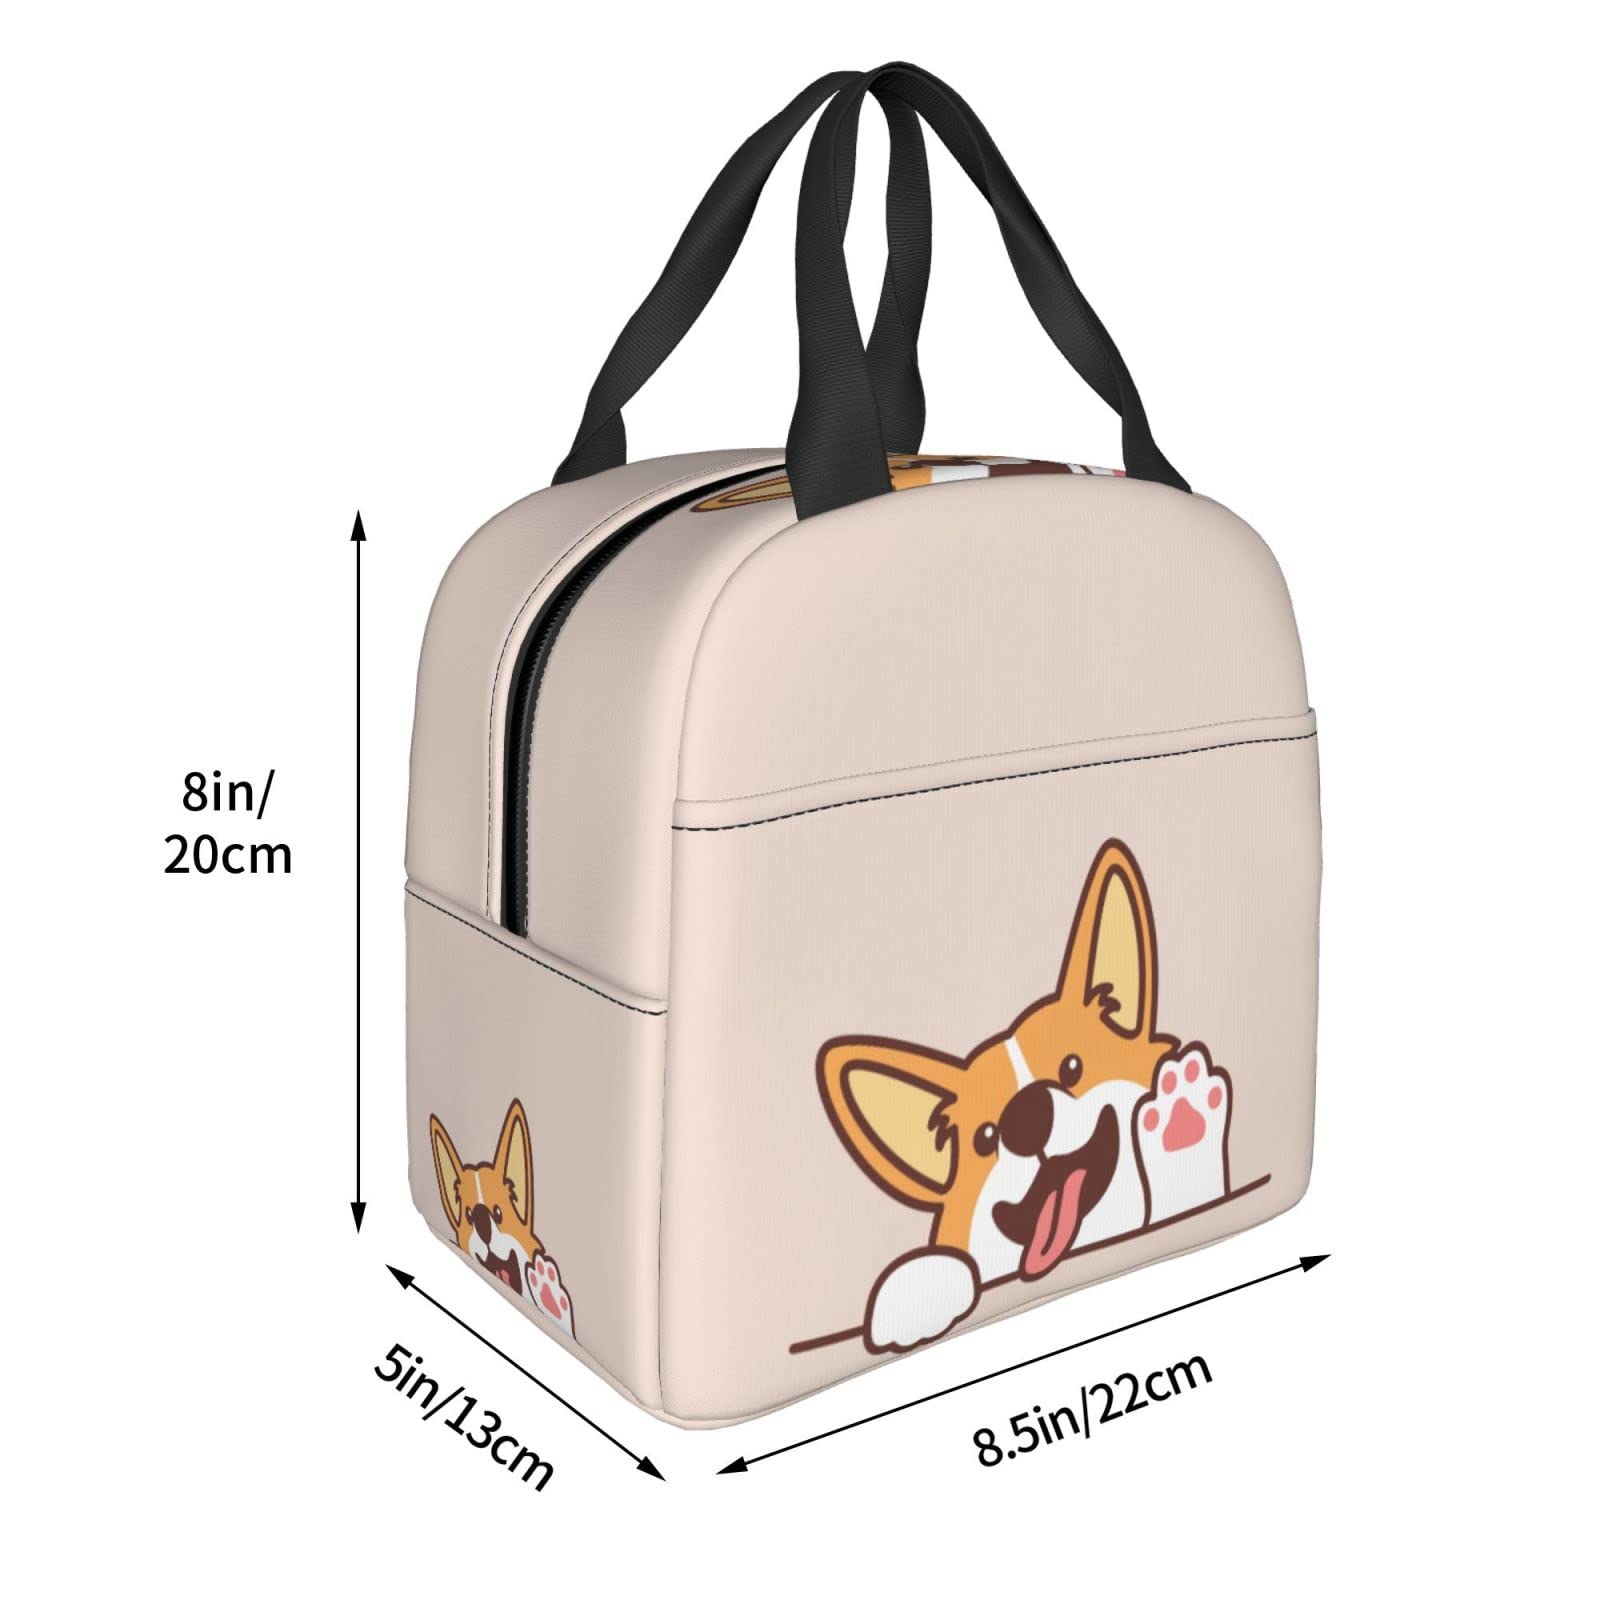 Lunch Bag Cute Welsh Corgi Dog Waving Paw Insulated Lunch Box Teen School Reusable Bags Meal Portable Container Tote For Boys Girls Travel Work Picnic Boxes